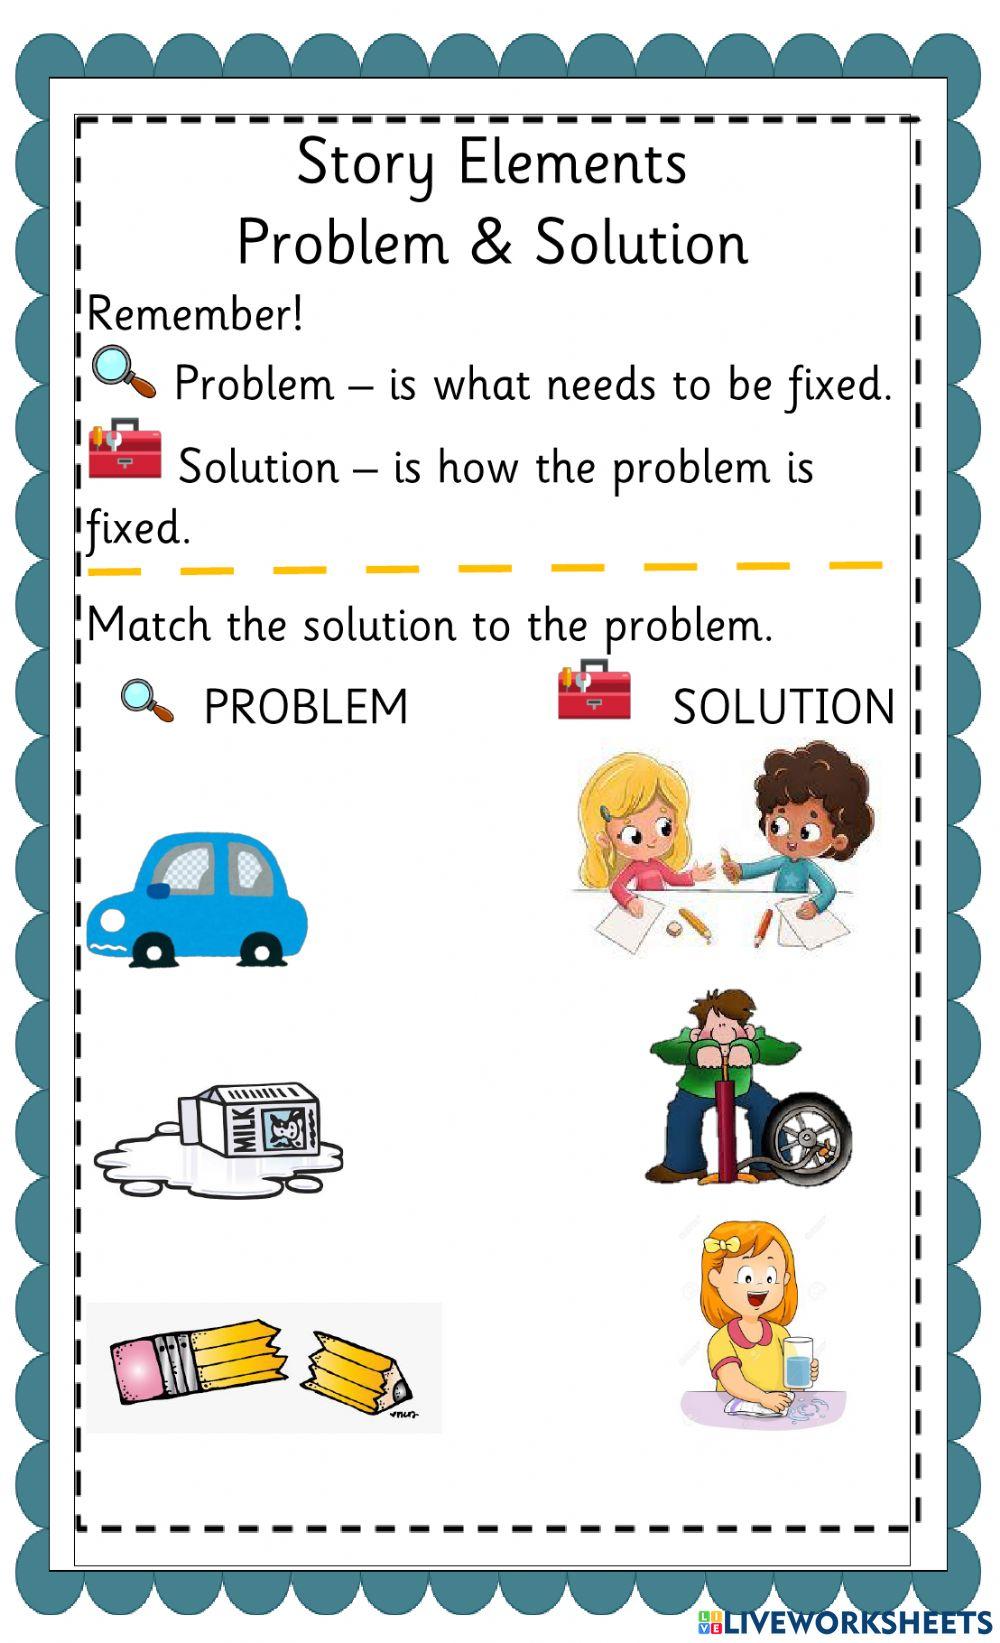 Story Elements - Problem and Solution